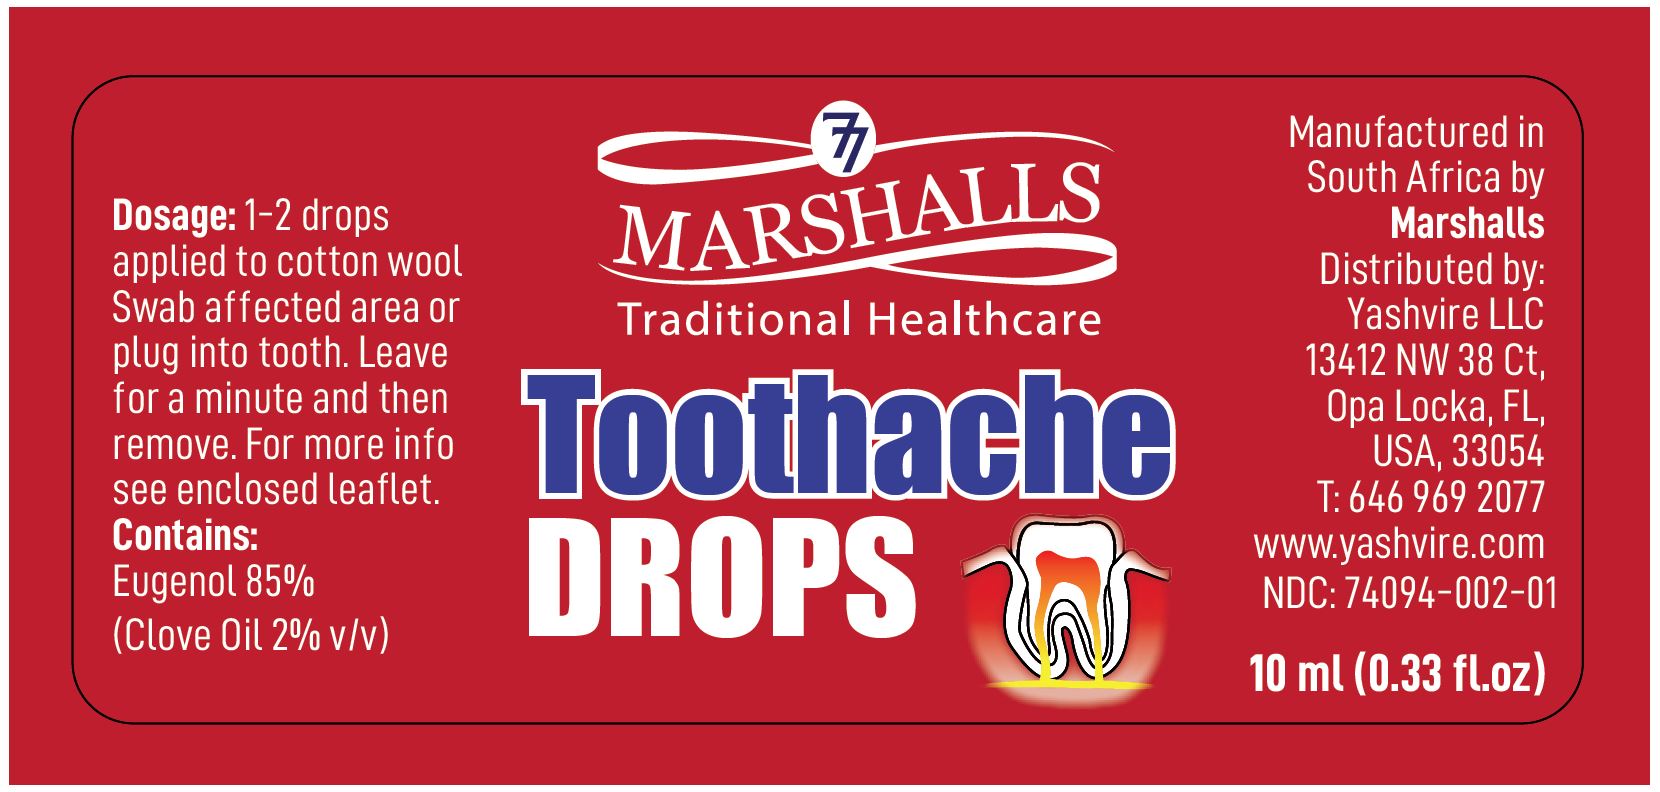 Marshall Toothache Drops - 10 ml (0.33 fl.oz) - NDC 74094-002-01 - Container